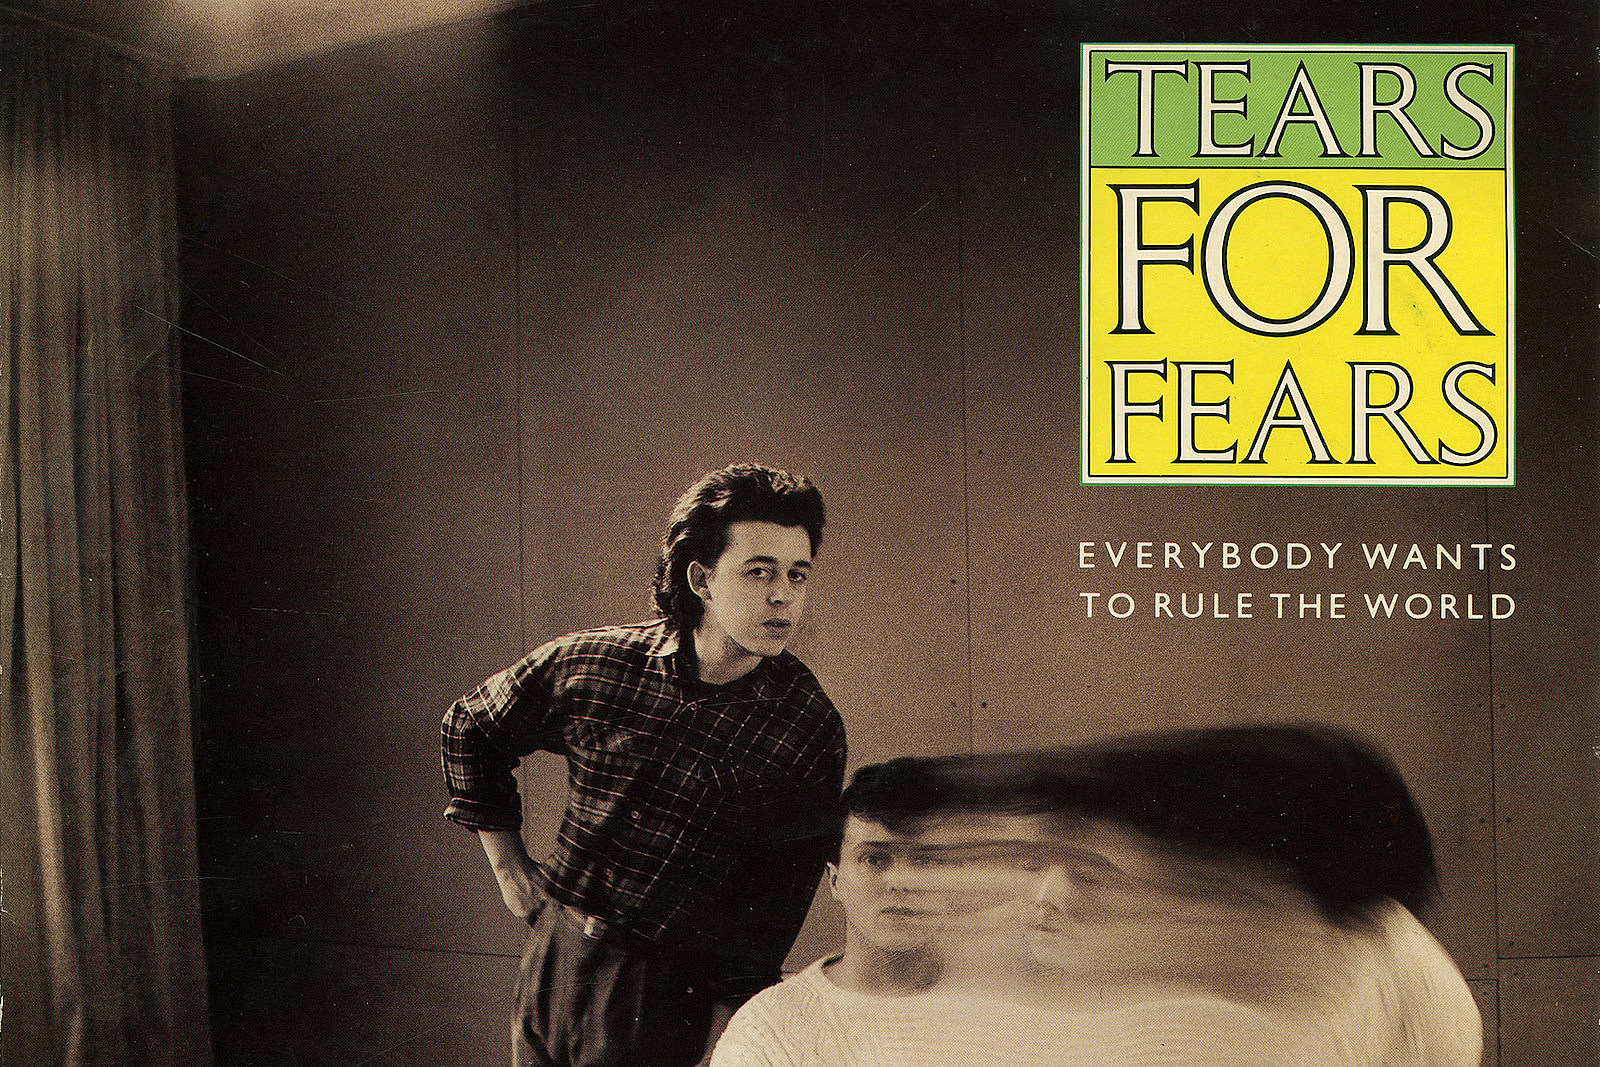 Tears For Fears - Everybody Wants To Rule The World 